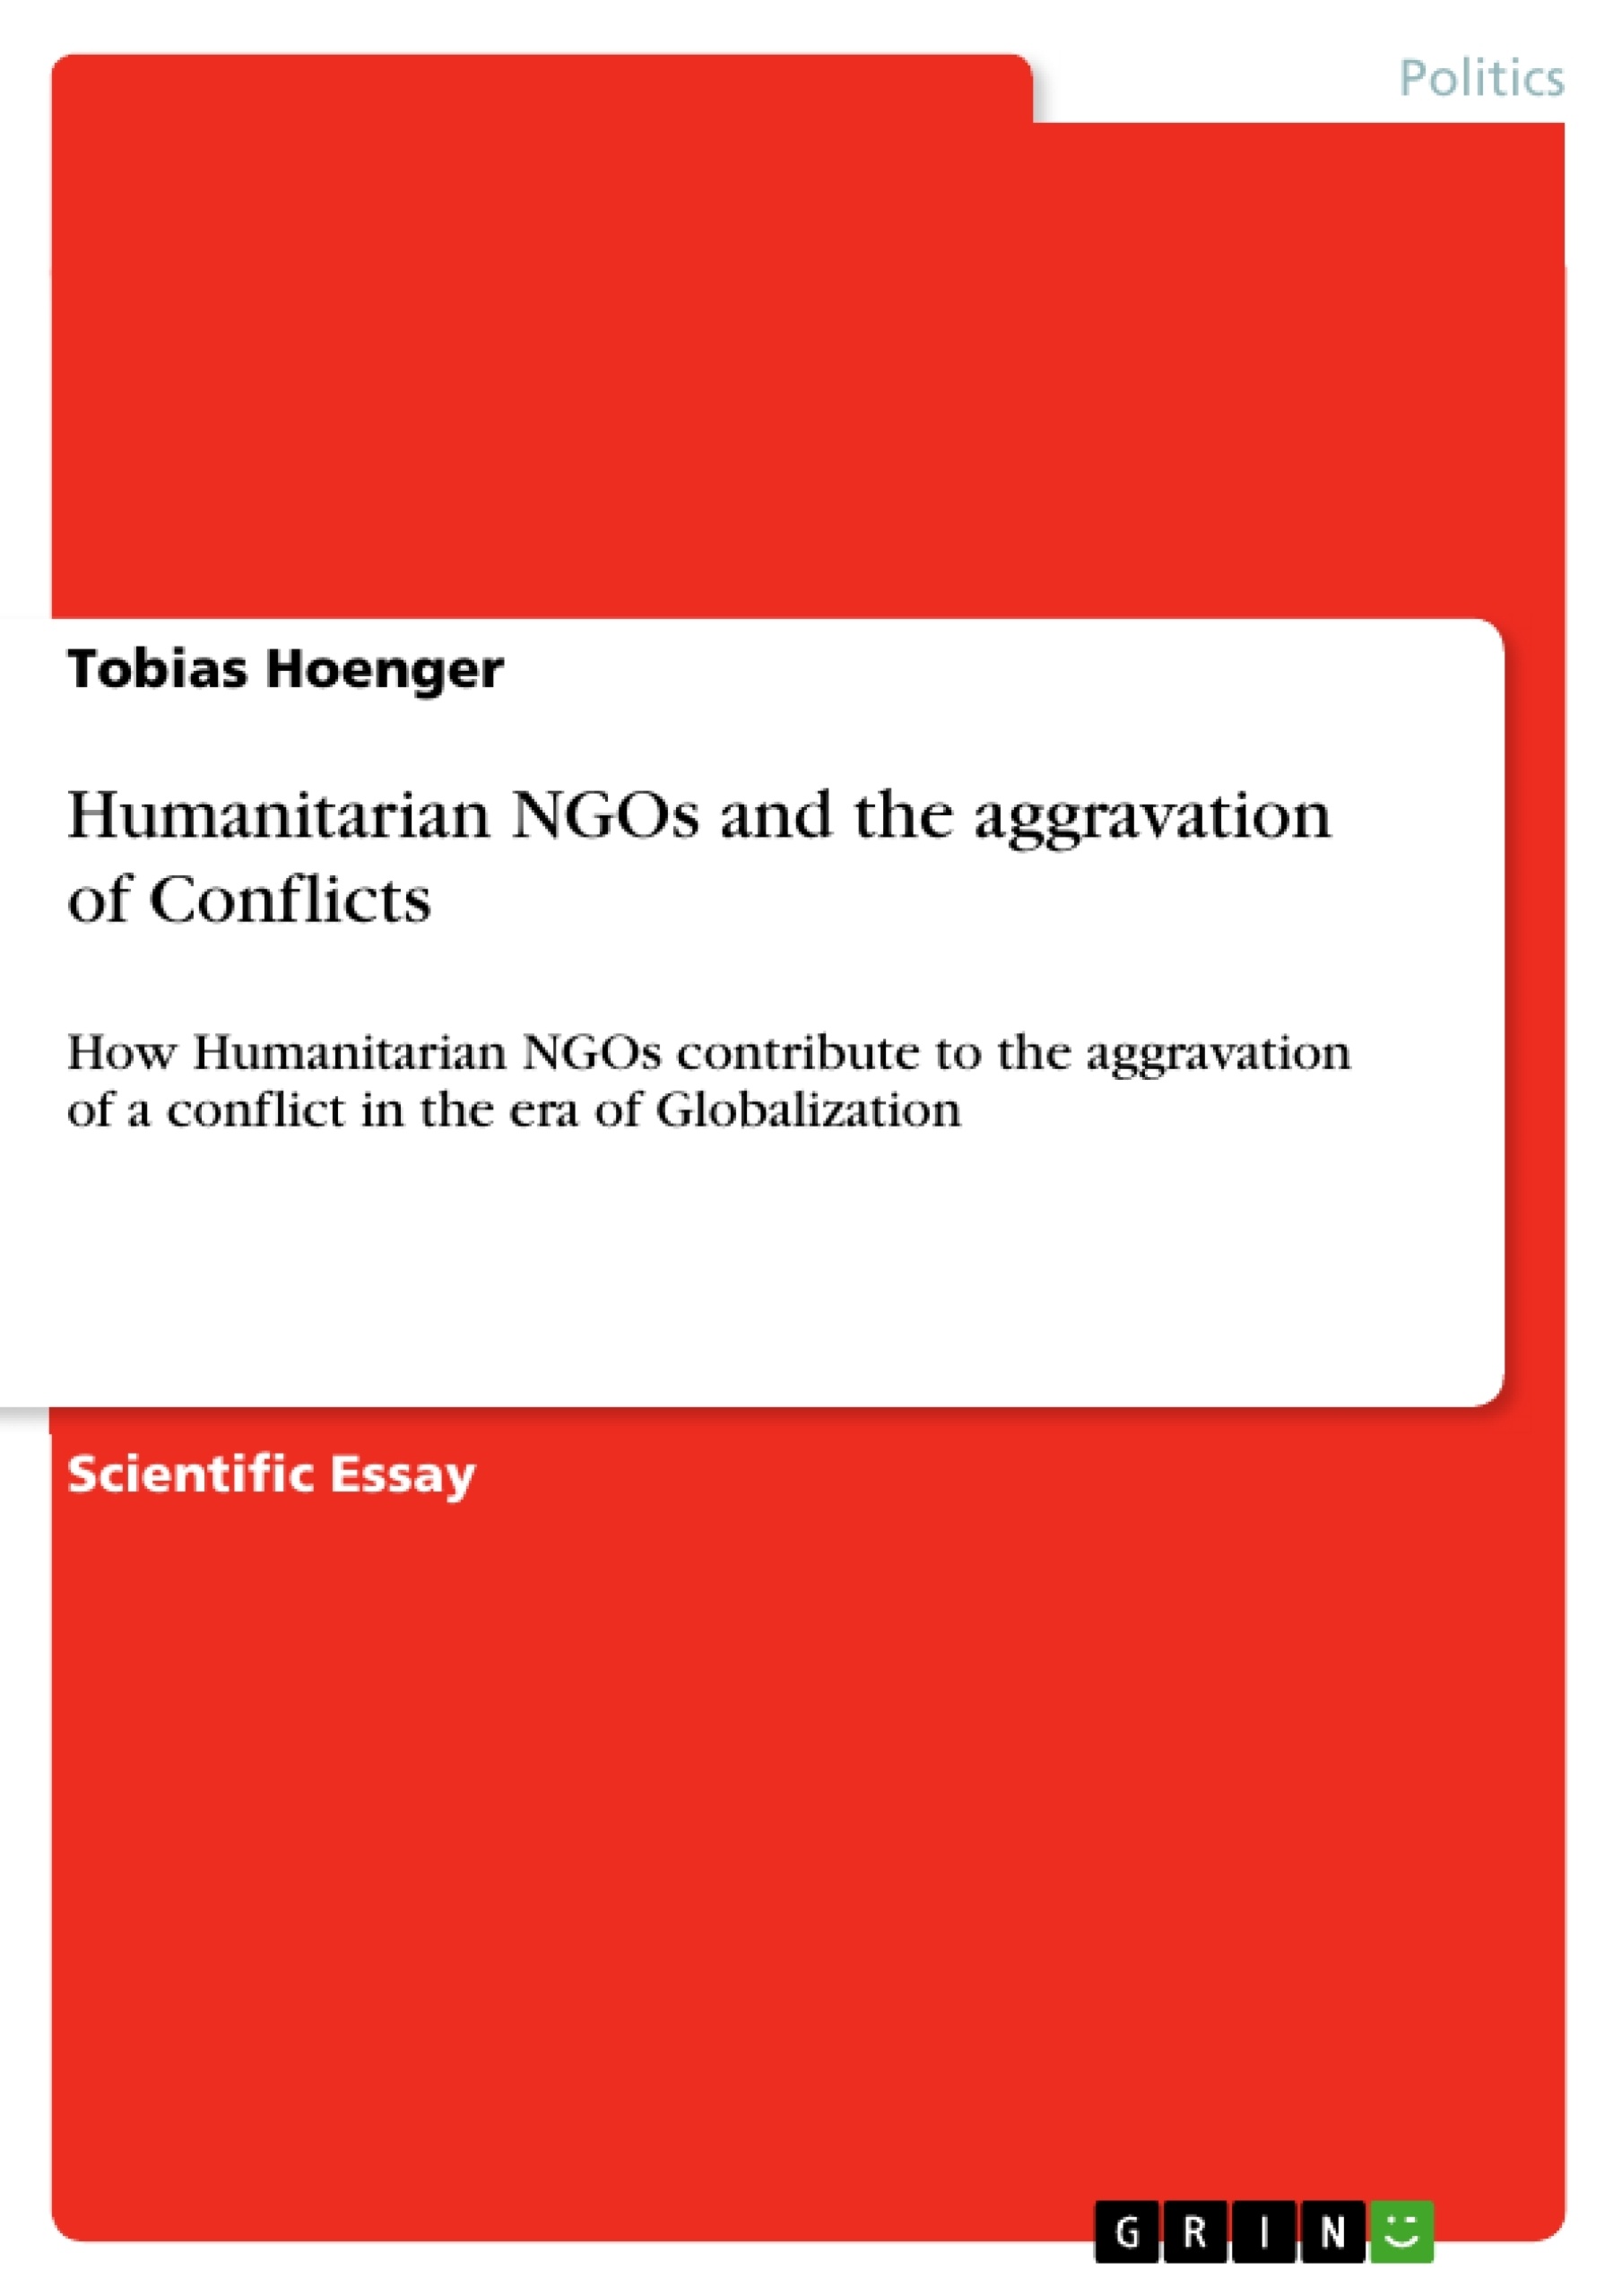 Título: Humanitarian NGOs and the aggravation of Conflicts